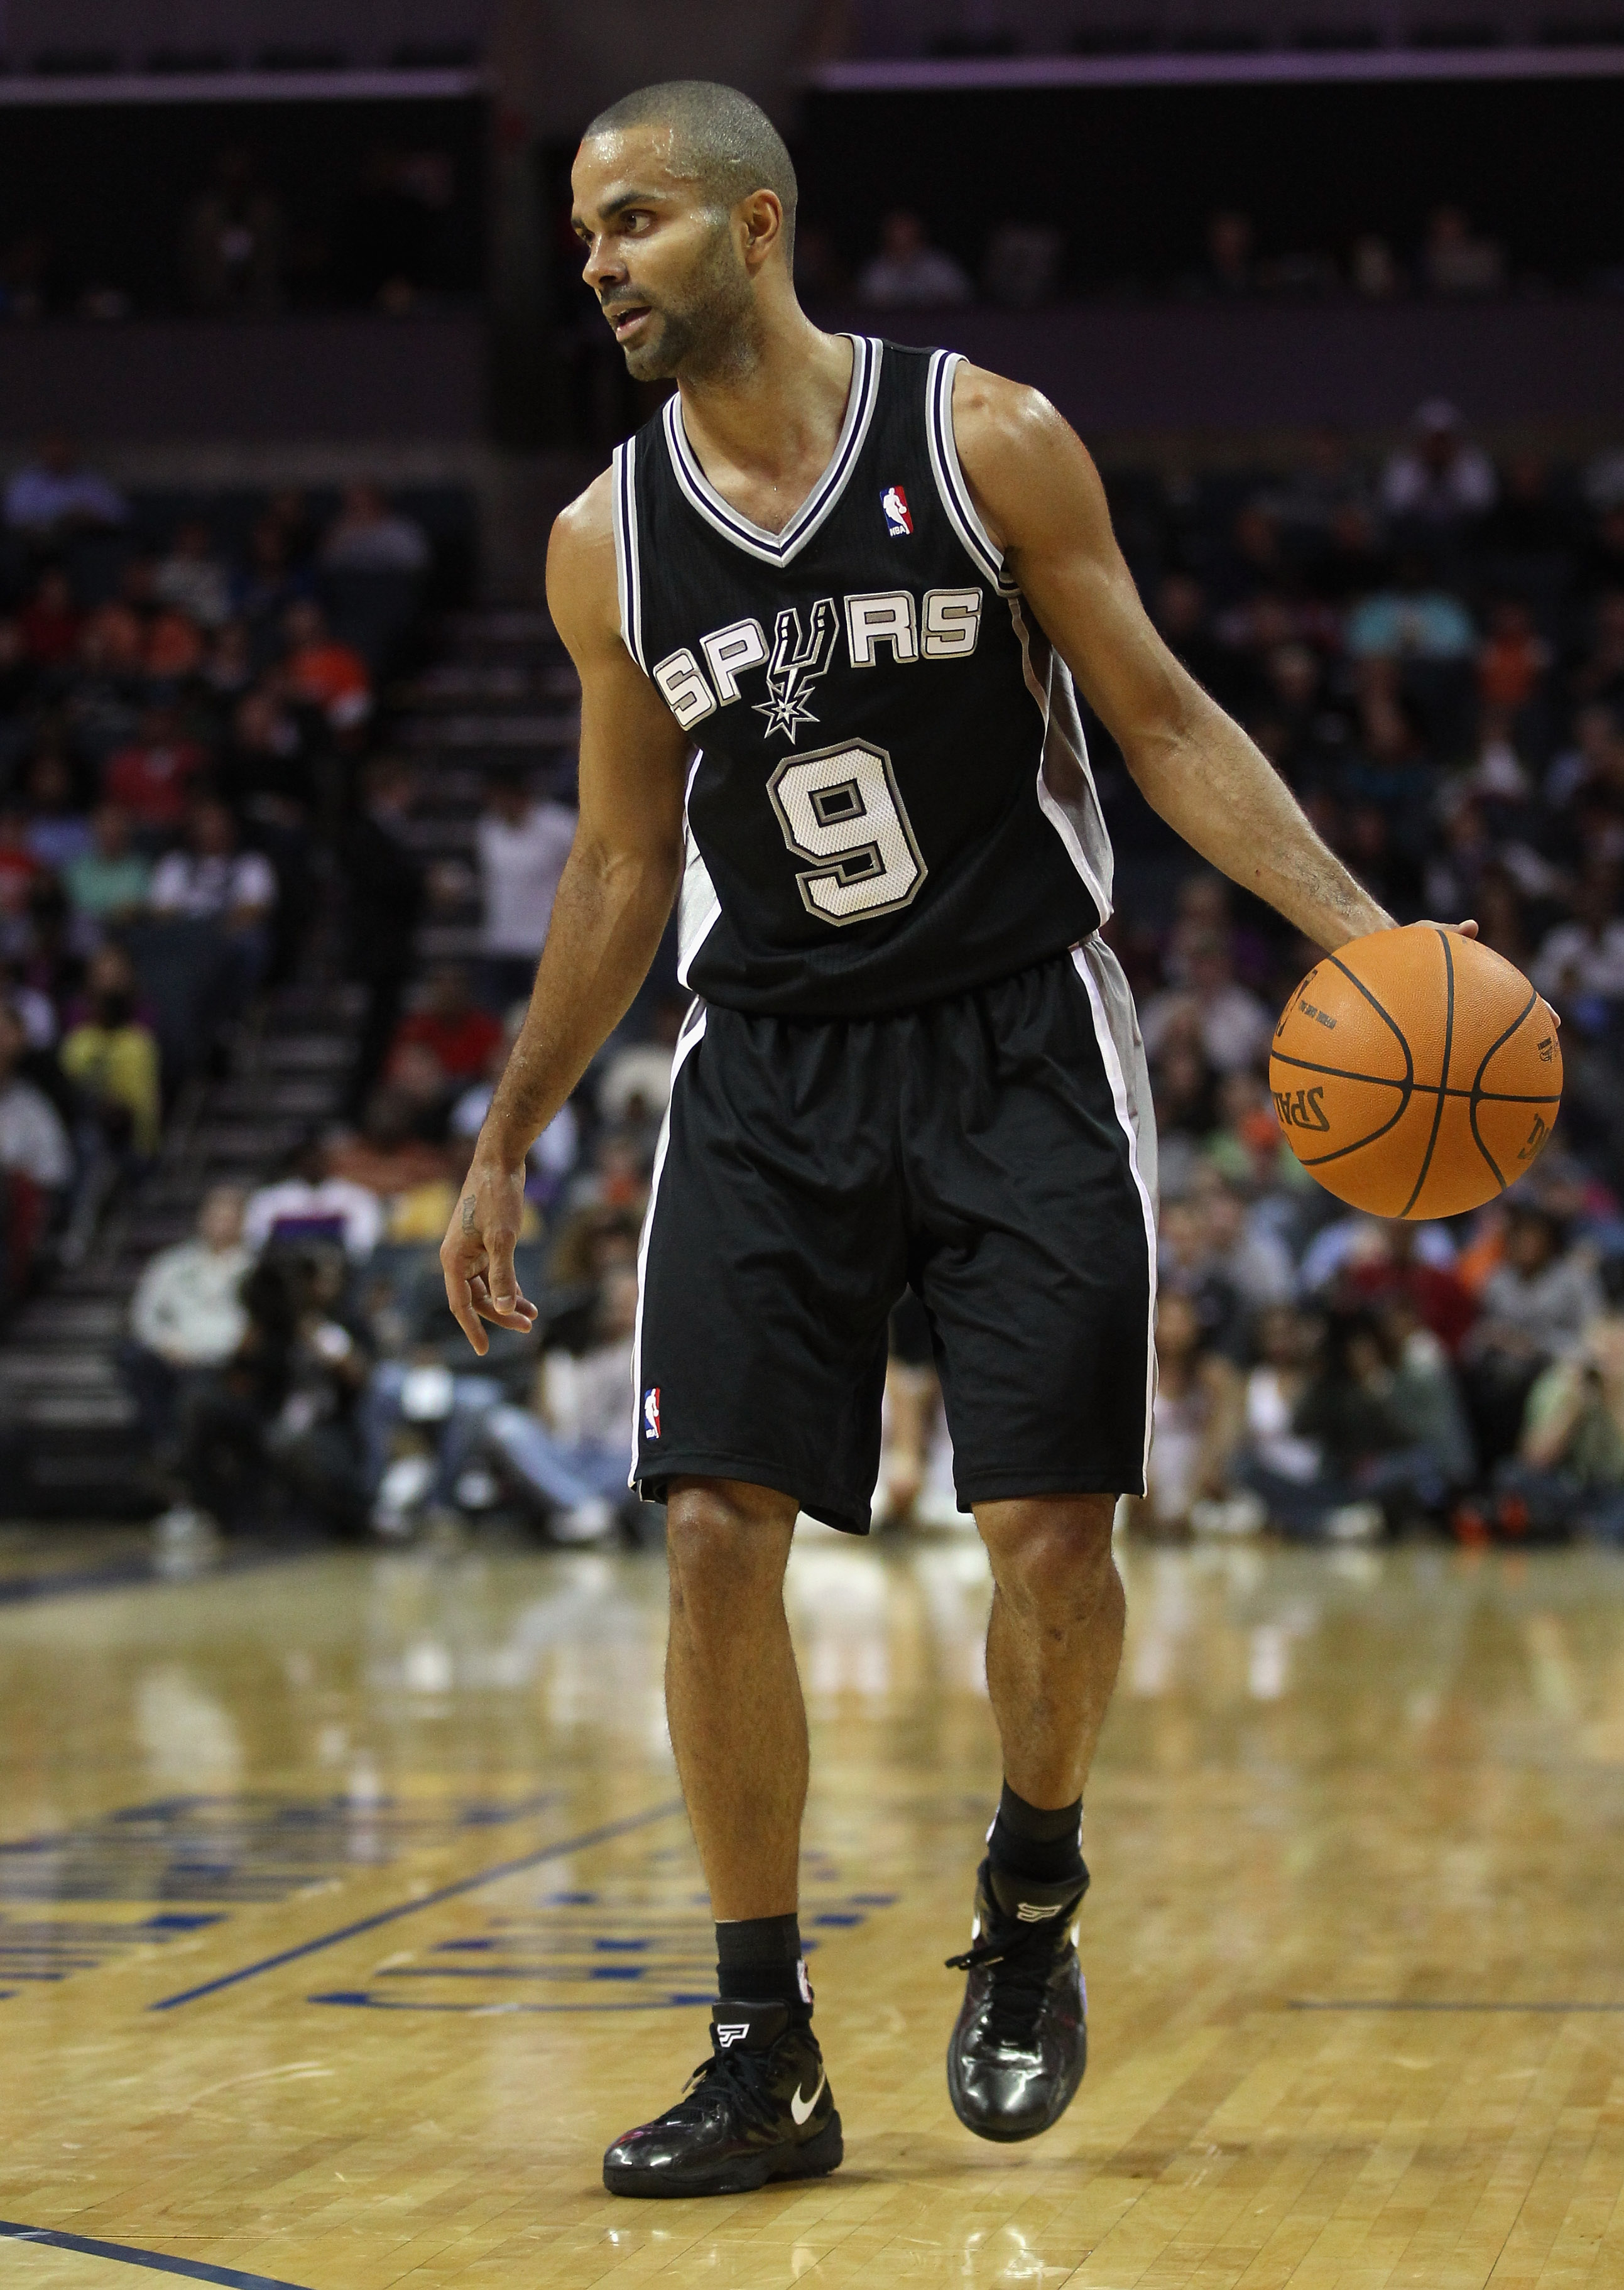 CHARLOTTE, NC - NOVEMBER 08:  Tony Parker #9 of the San Antonio Spurs against the Charlotte Bobcats during their game at Time Warner Cable Arena on November 8, 2010 in Charlotte, North Carolina.  NOTE TO USER: User expressly acknowledges and agrees that,